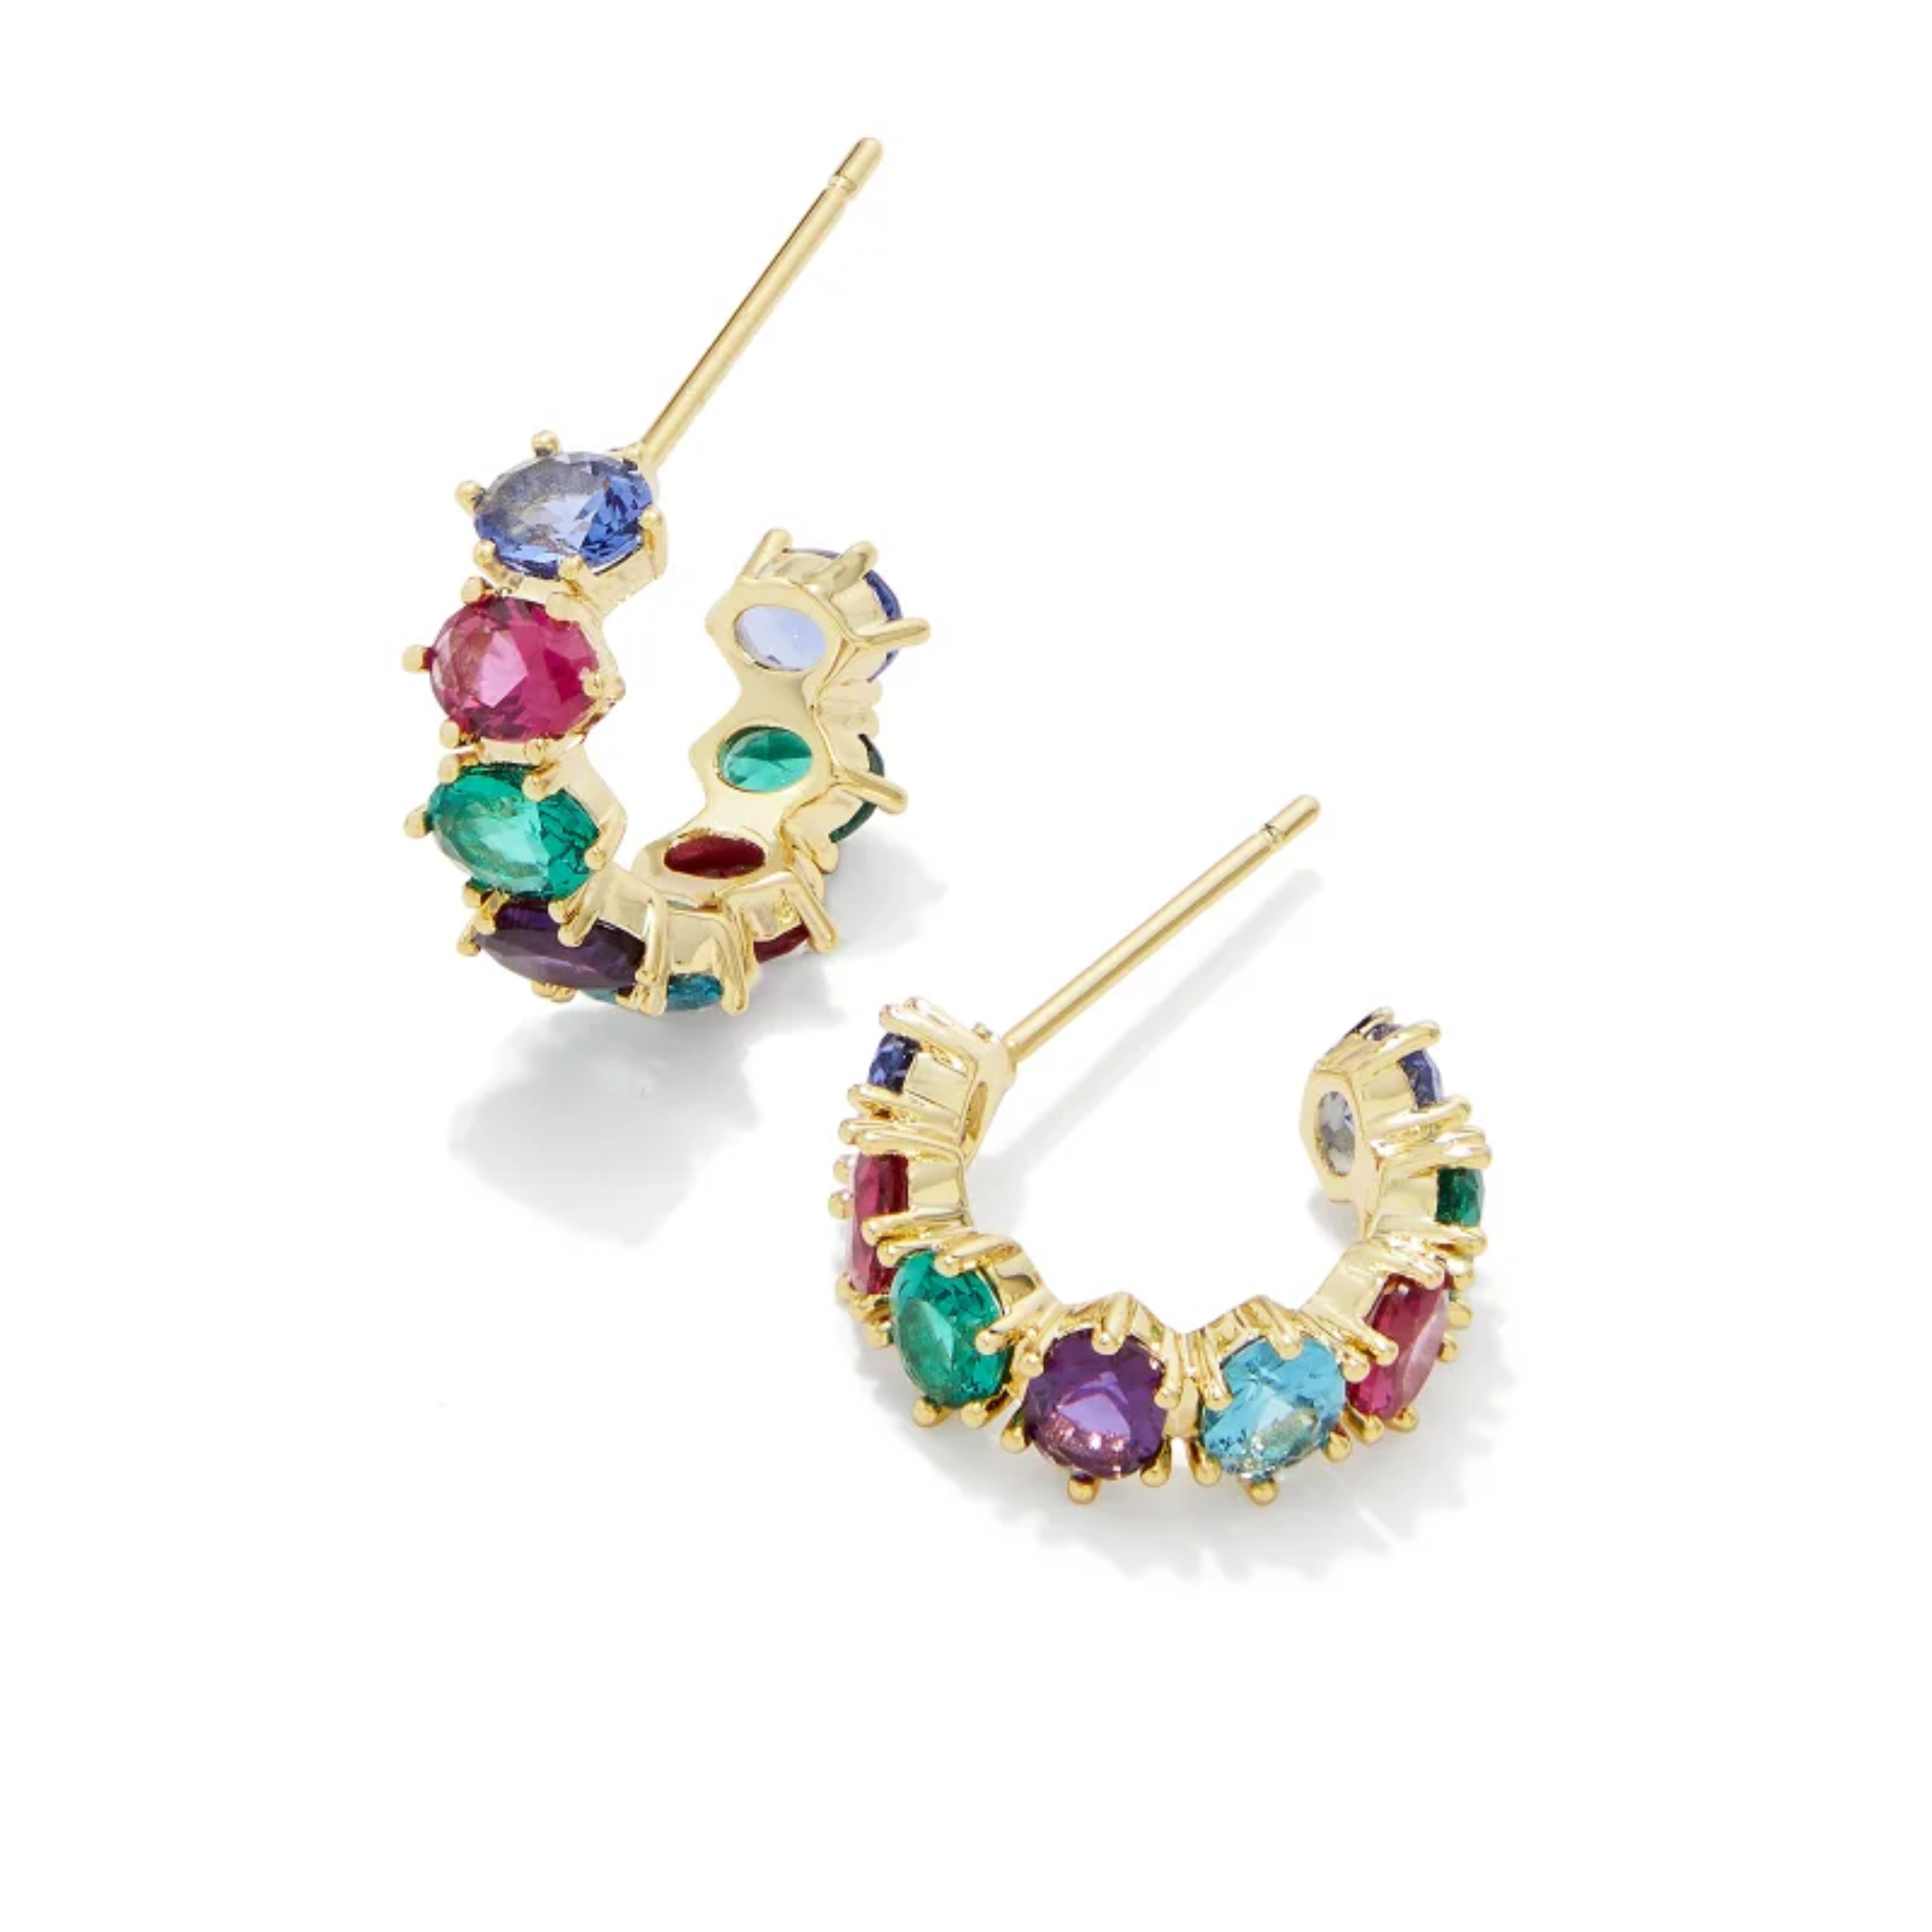 These Cailin Gold Crystal Huggie Earrings in Multi Mix by Kendra Scott are pictured on a white background.